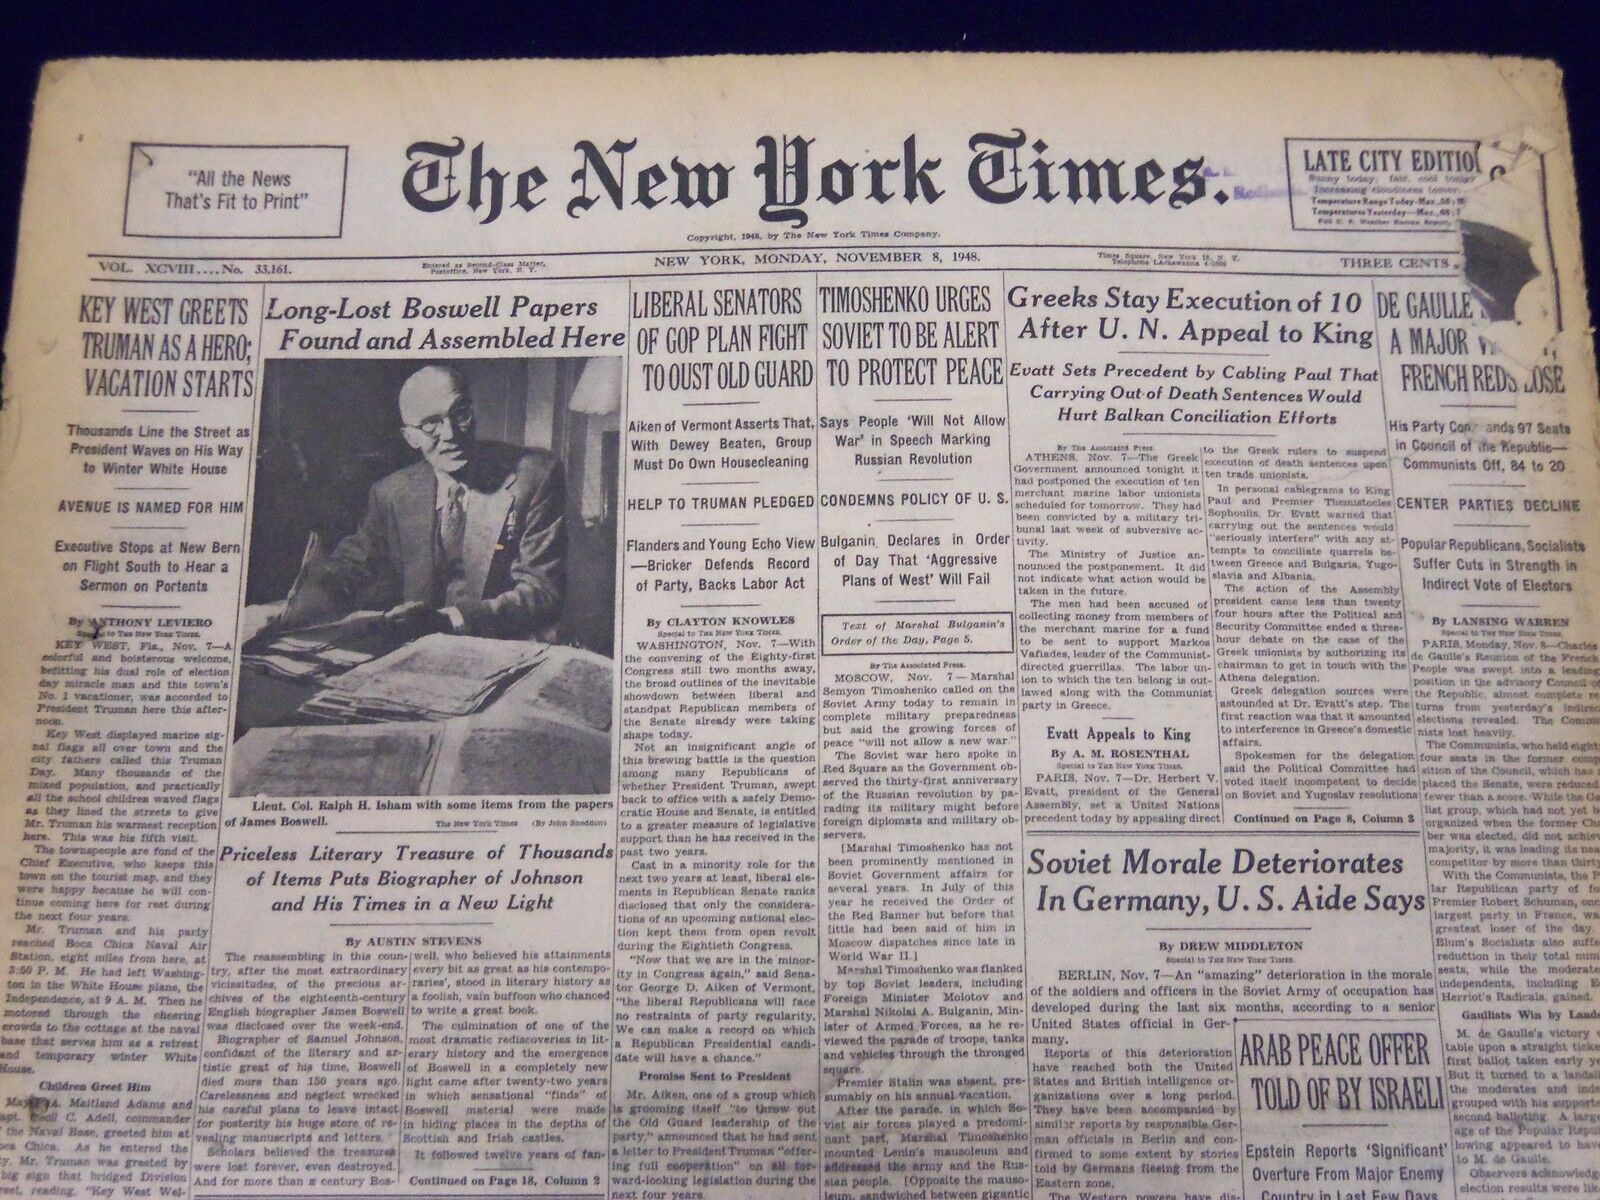 1948 NOV 8 NEW YORK TIMES NEWSPAPER - LONG LOST BOSWELL PAPERS FOUND - NT 13